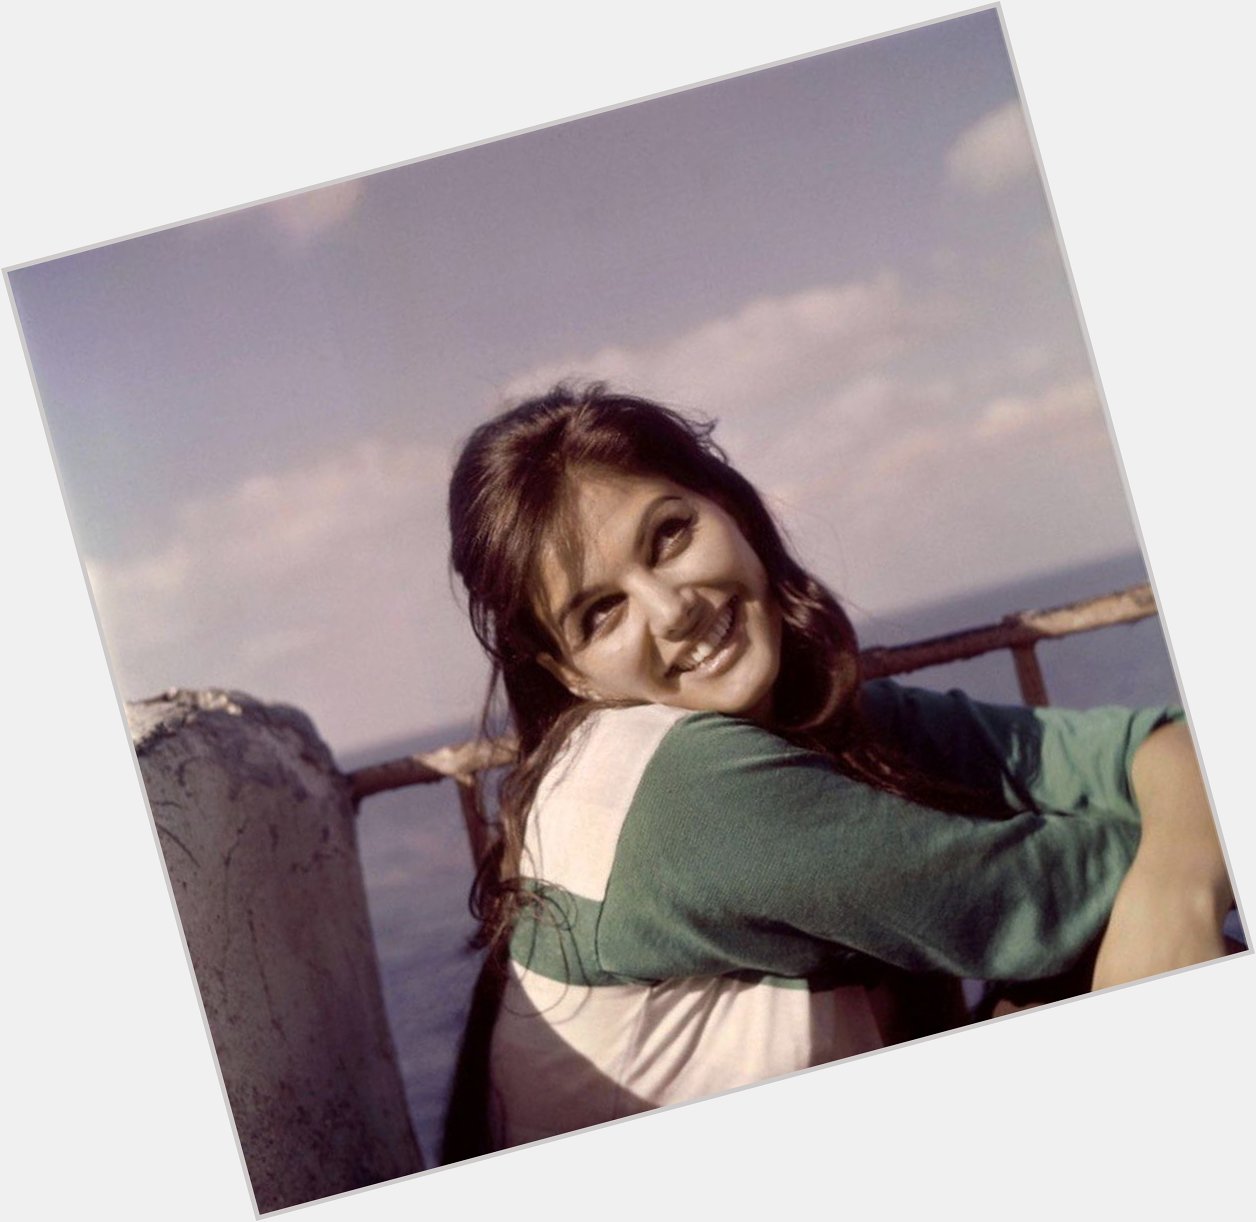 Happy birthday Claudia Cardinale, an incredible actress and Italian icon, who turns 84 today   